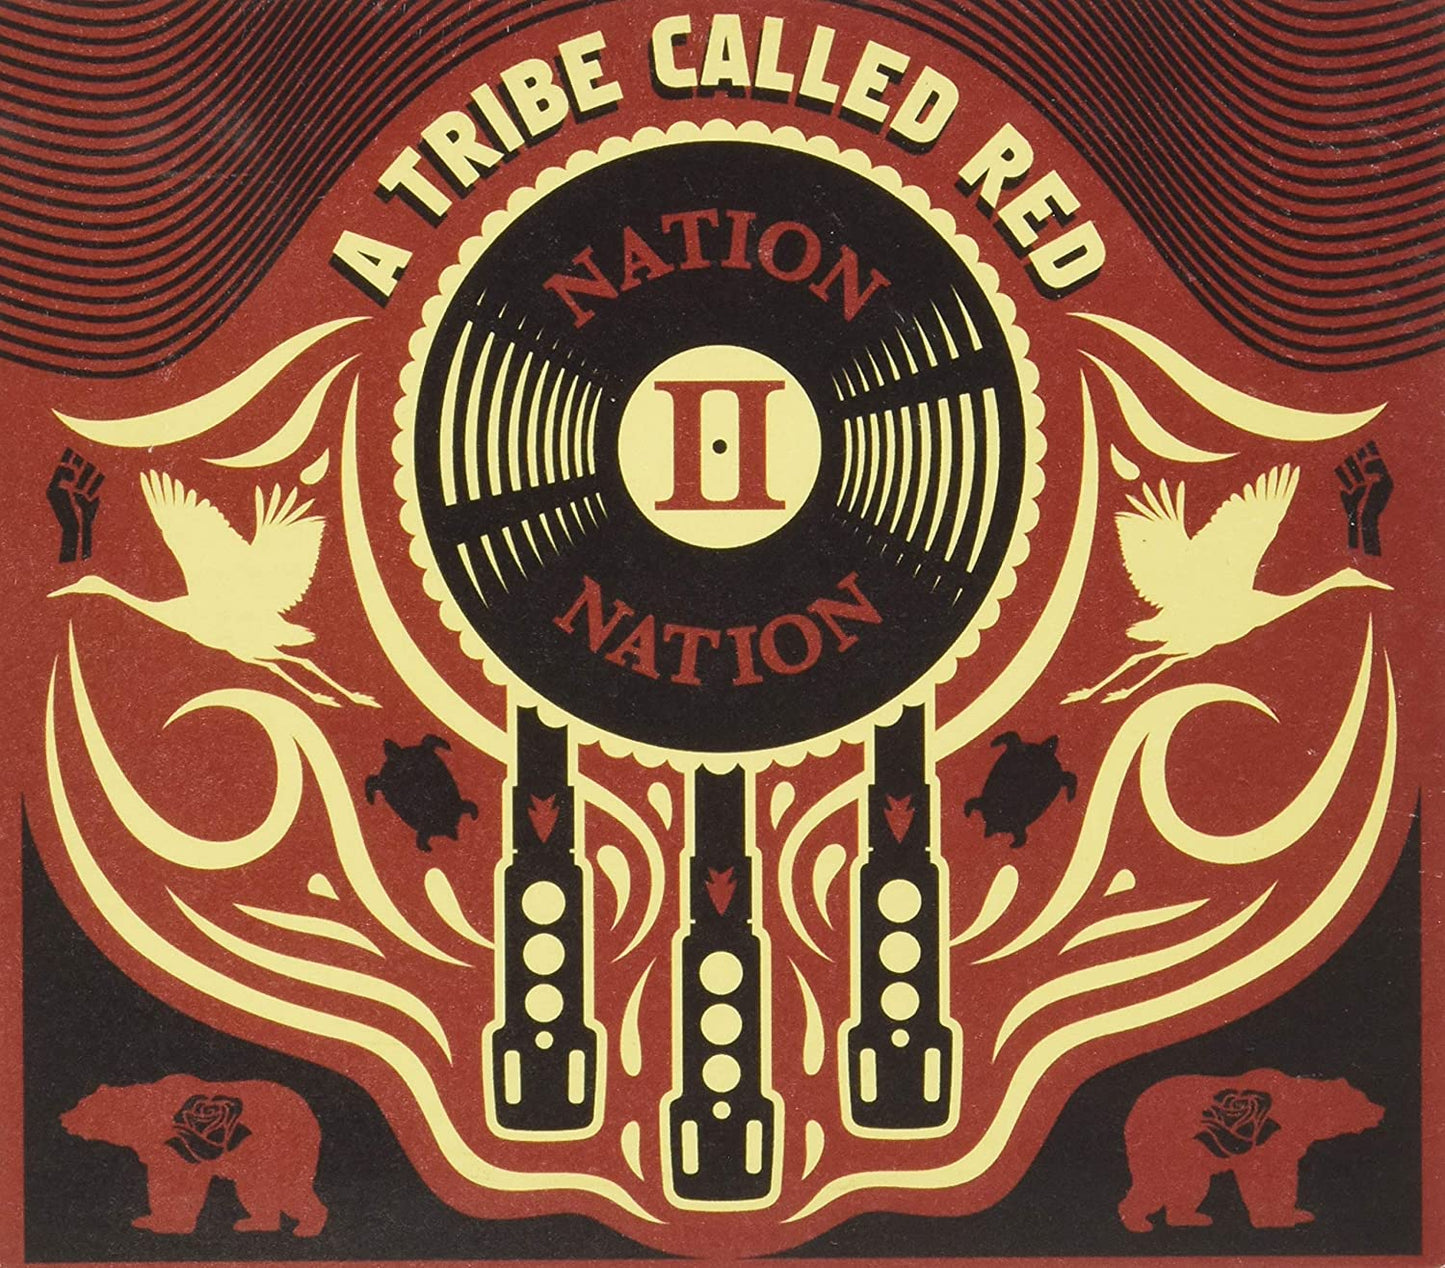 A Tribe Called Red - Nation II Nation - USED CD